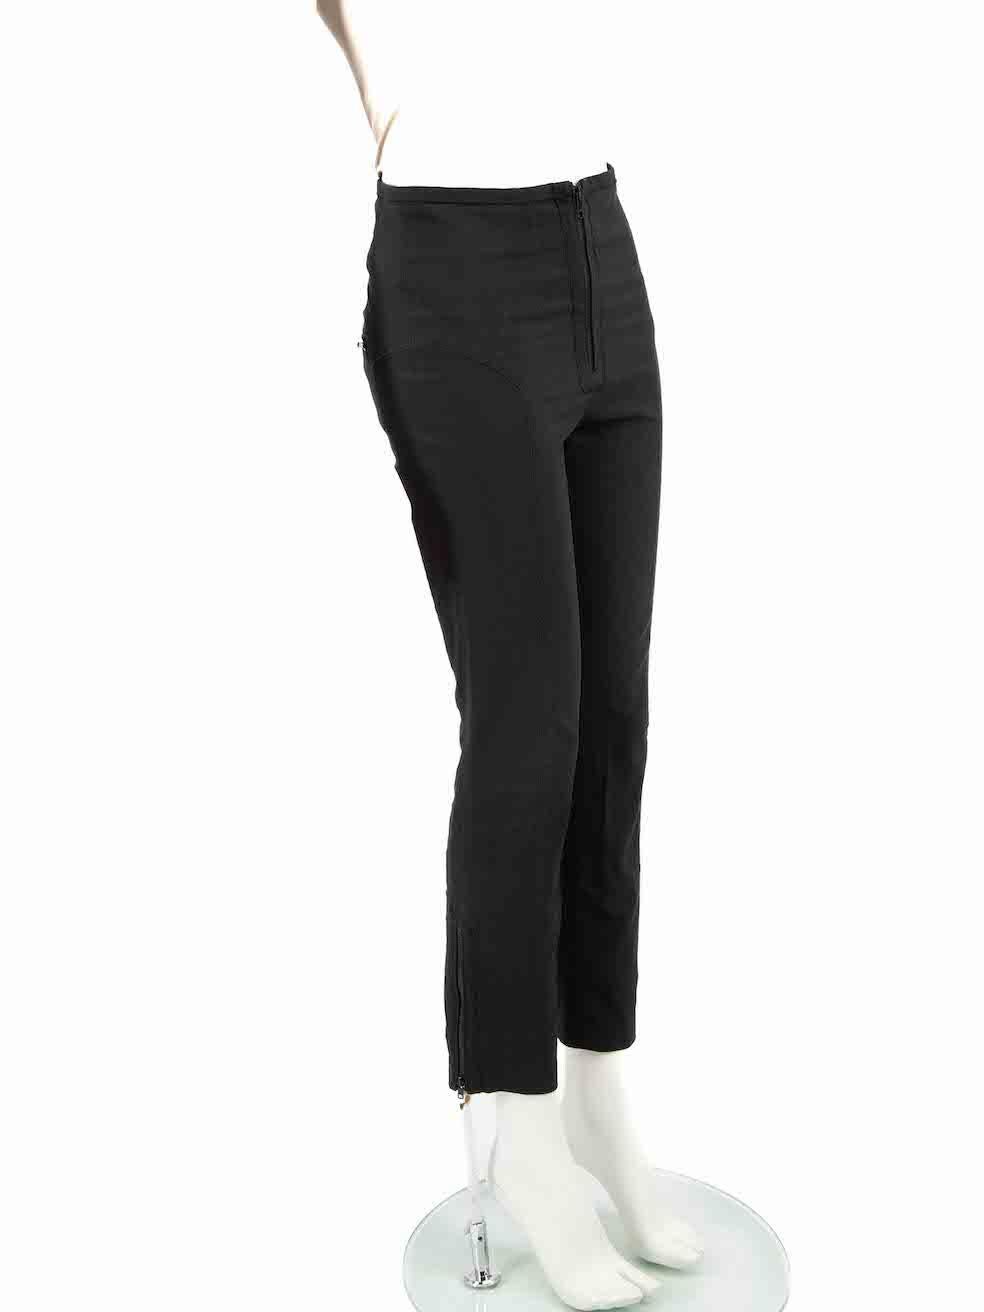 CONDITION is Very good. Minimal wear to trousers is evident. Minimal tarnishing to rear zipper hardware on this used Isabel Marant designer resale item.
 
 
 
 Details
 
 
 Black
 
 Cotton
 
 Trousers
 
 High rise
 
 Skinny fit
 
 Front zip